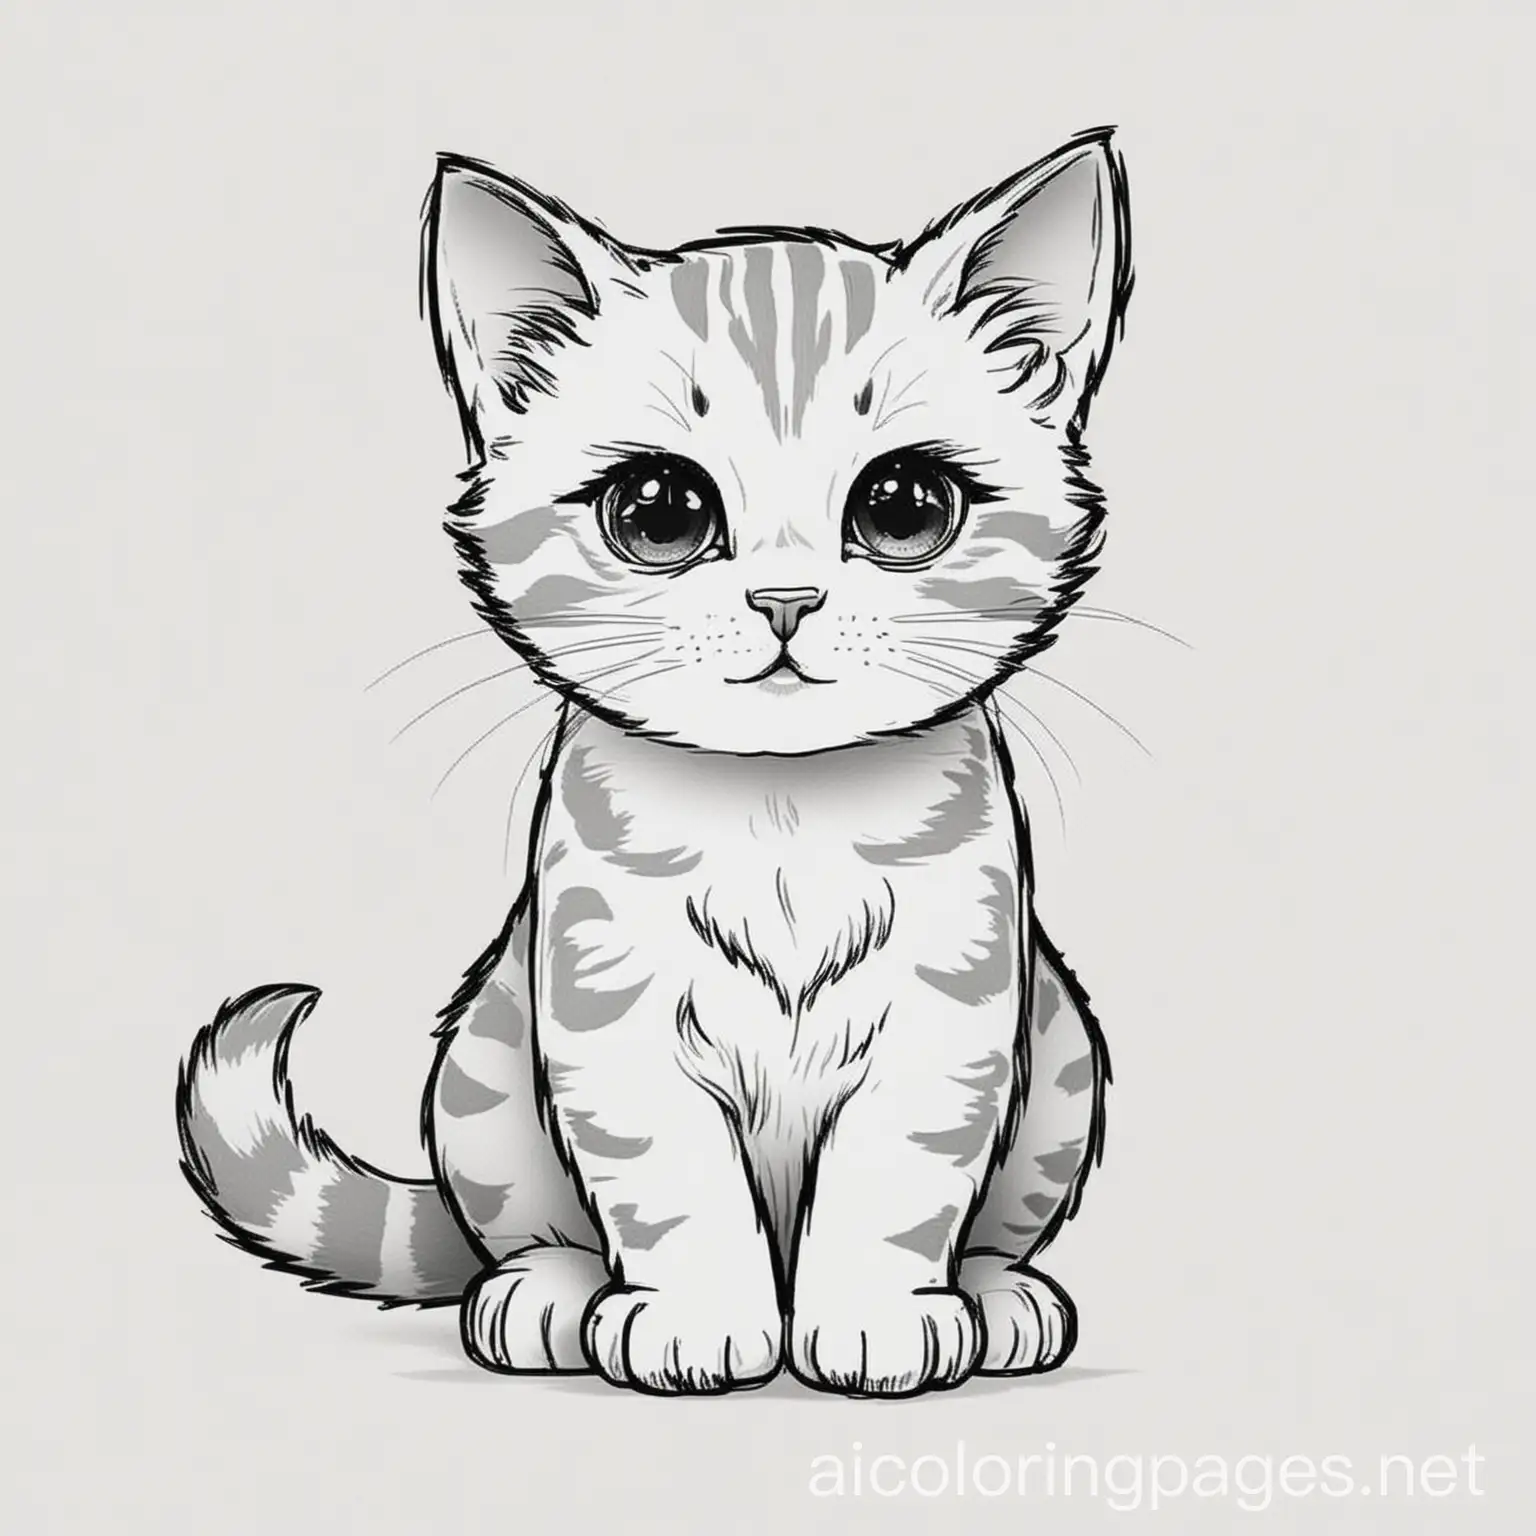 motif of a small kitten, coloring page, black and white, line art, white background, simplicity, ample white space. The background of the coloring page is plain white to make it easy for young children to color within the lines. The outlines of all the subjects are easy to distinguish, making it simple for kids to color without too much difficulty